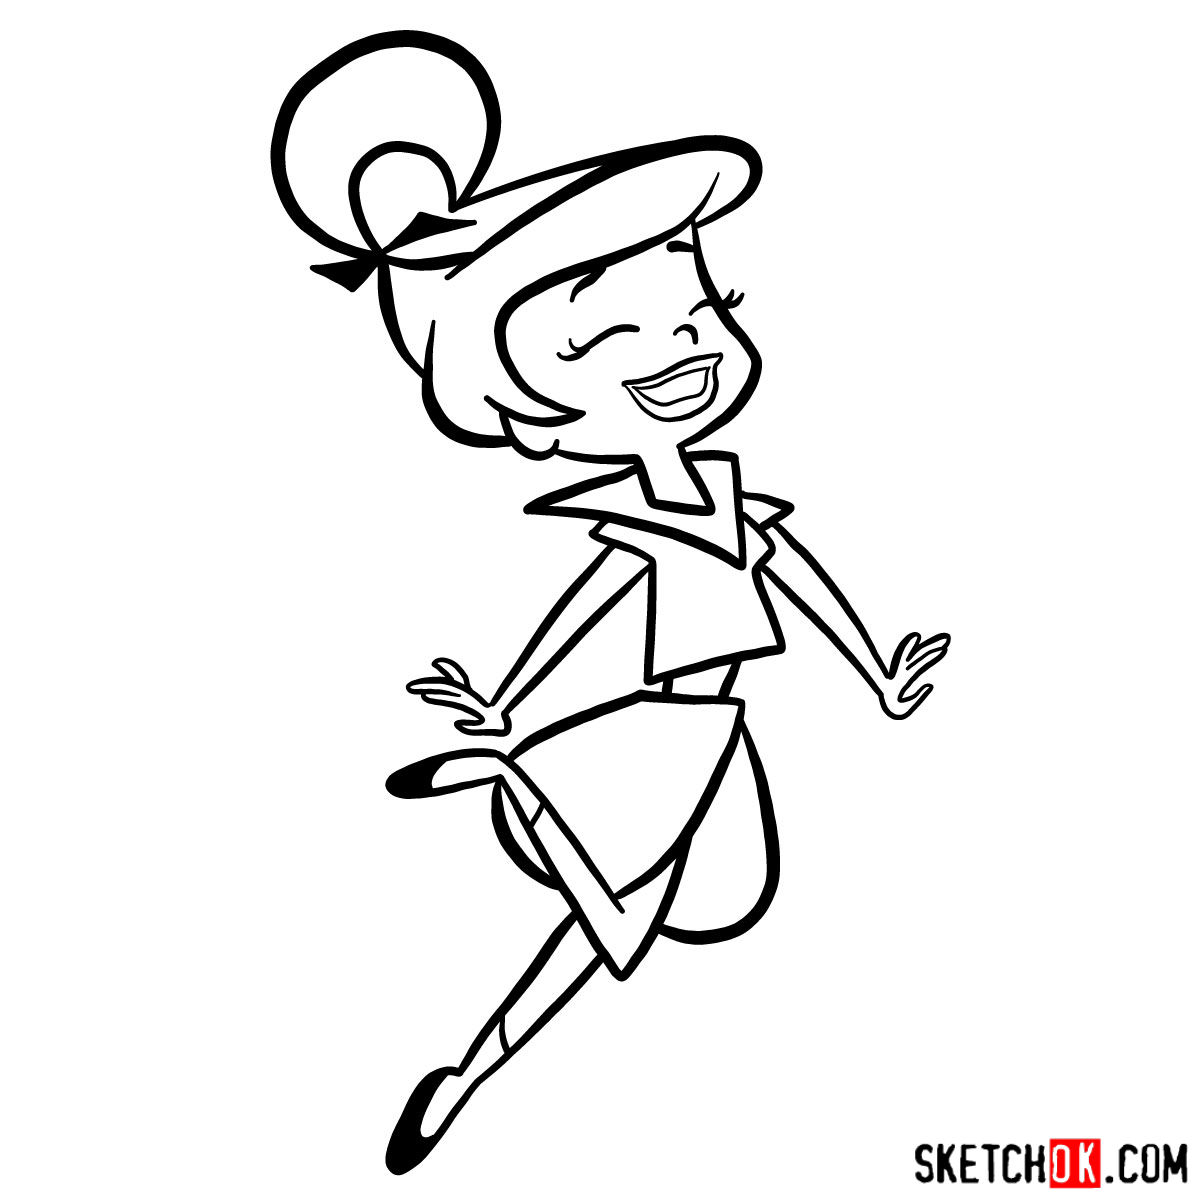 How to draw Judy Jetson - step 12